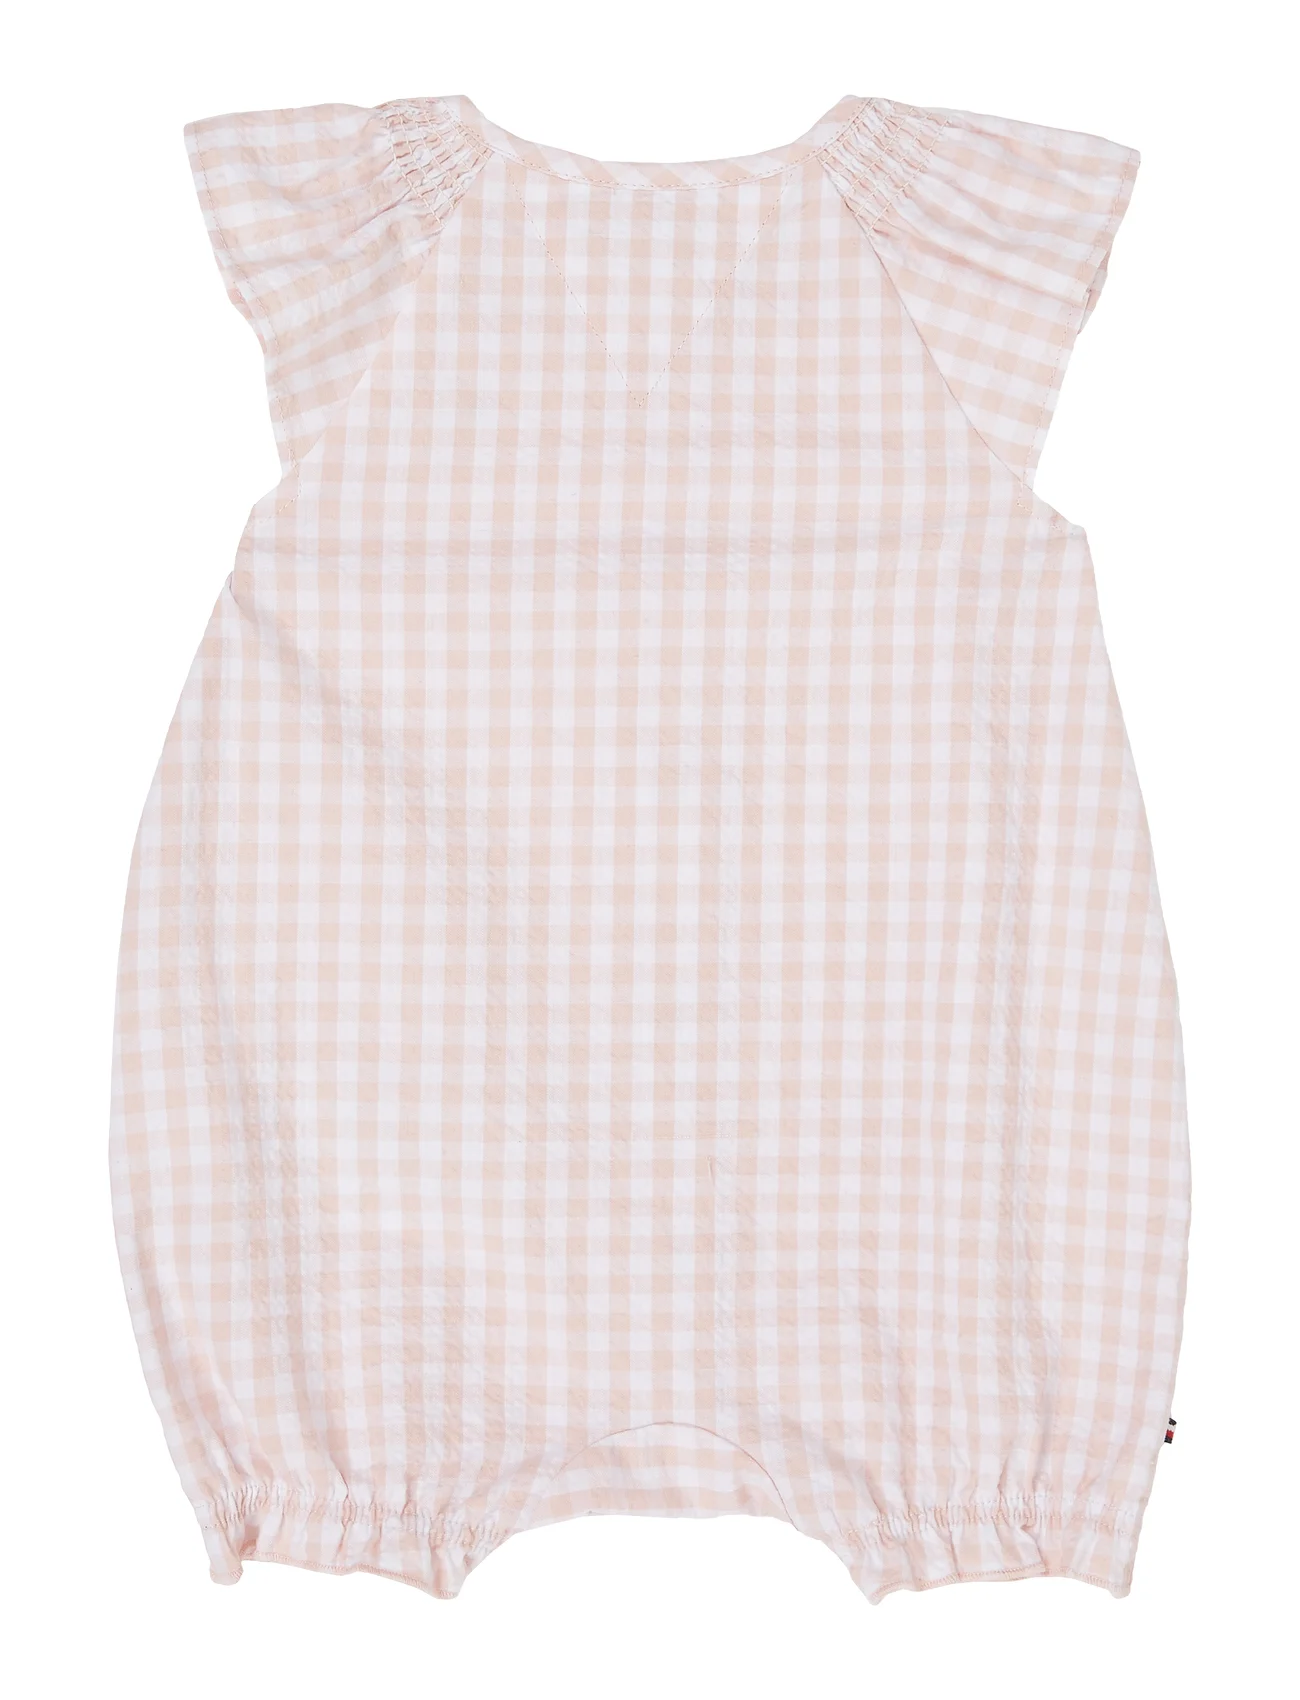 Tommy Hilfiger - BABY RUFFLE GINGHAM SHORTALL - heldrakter - white / pink check - 1